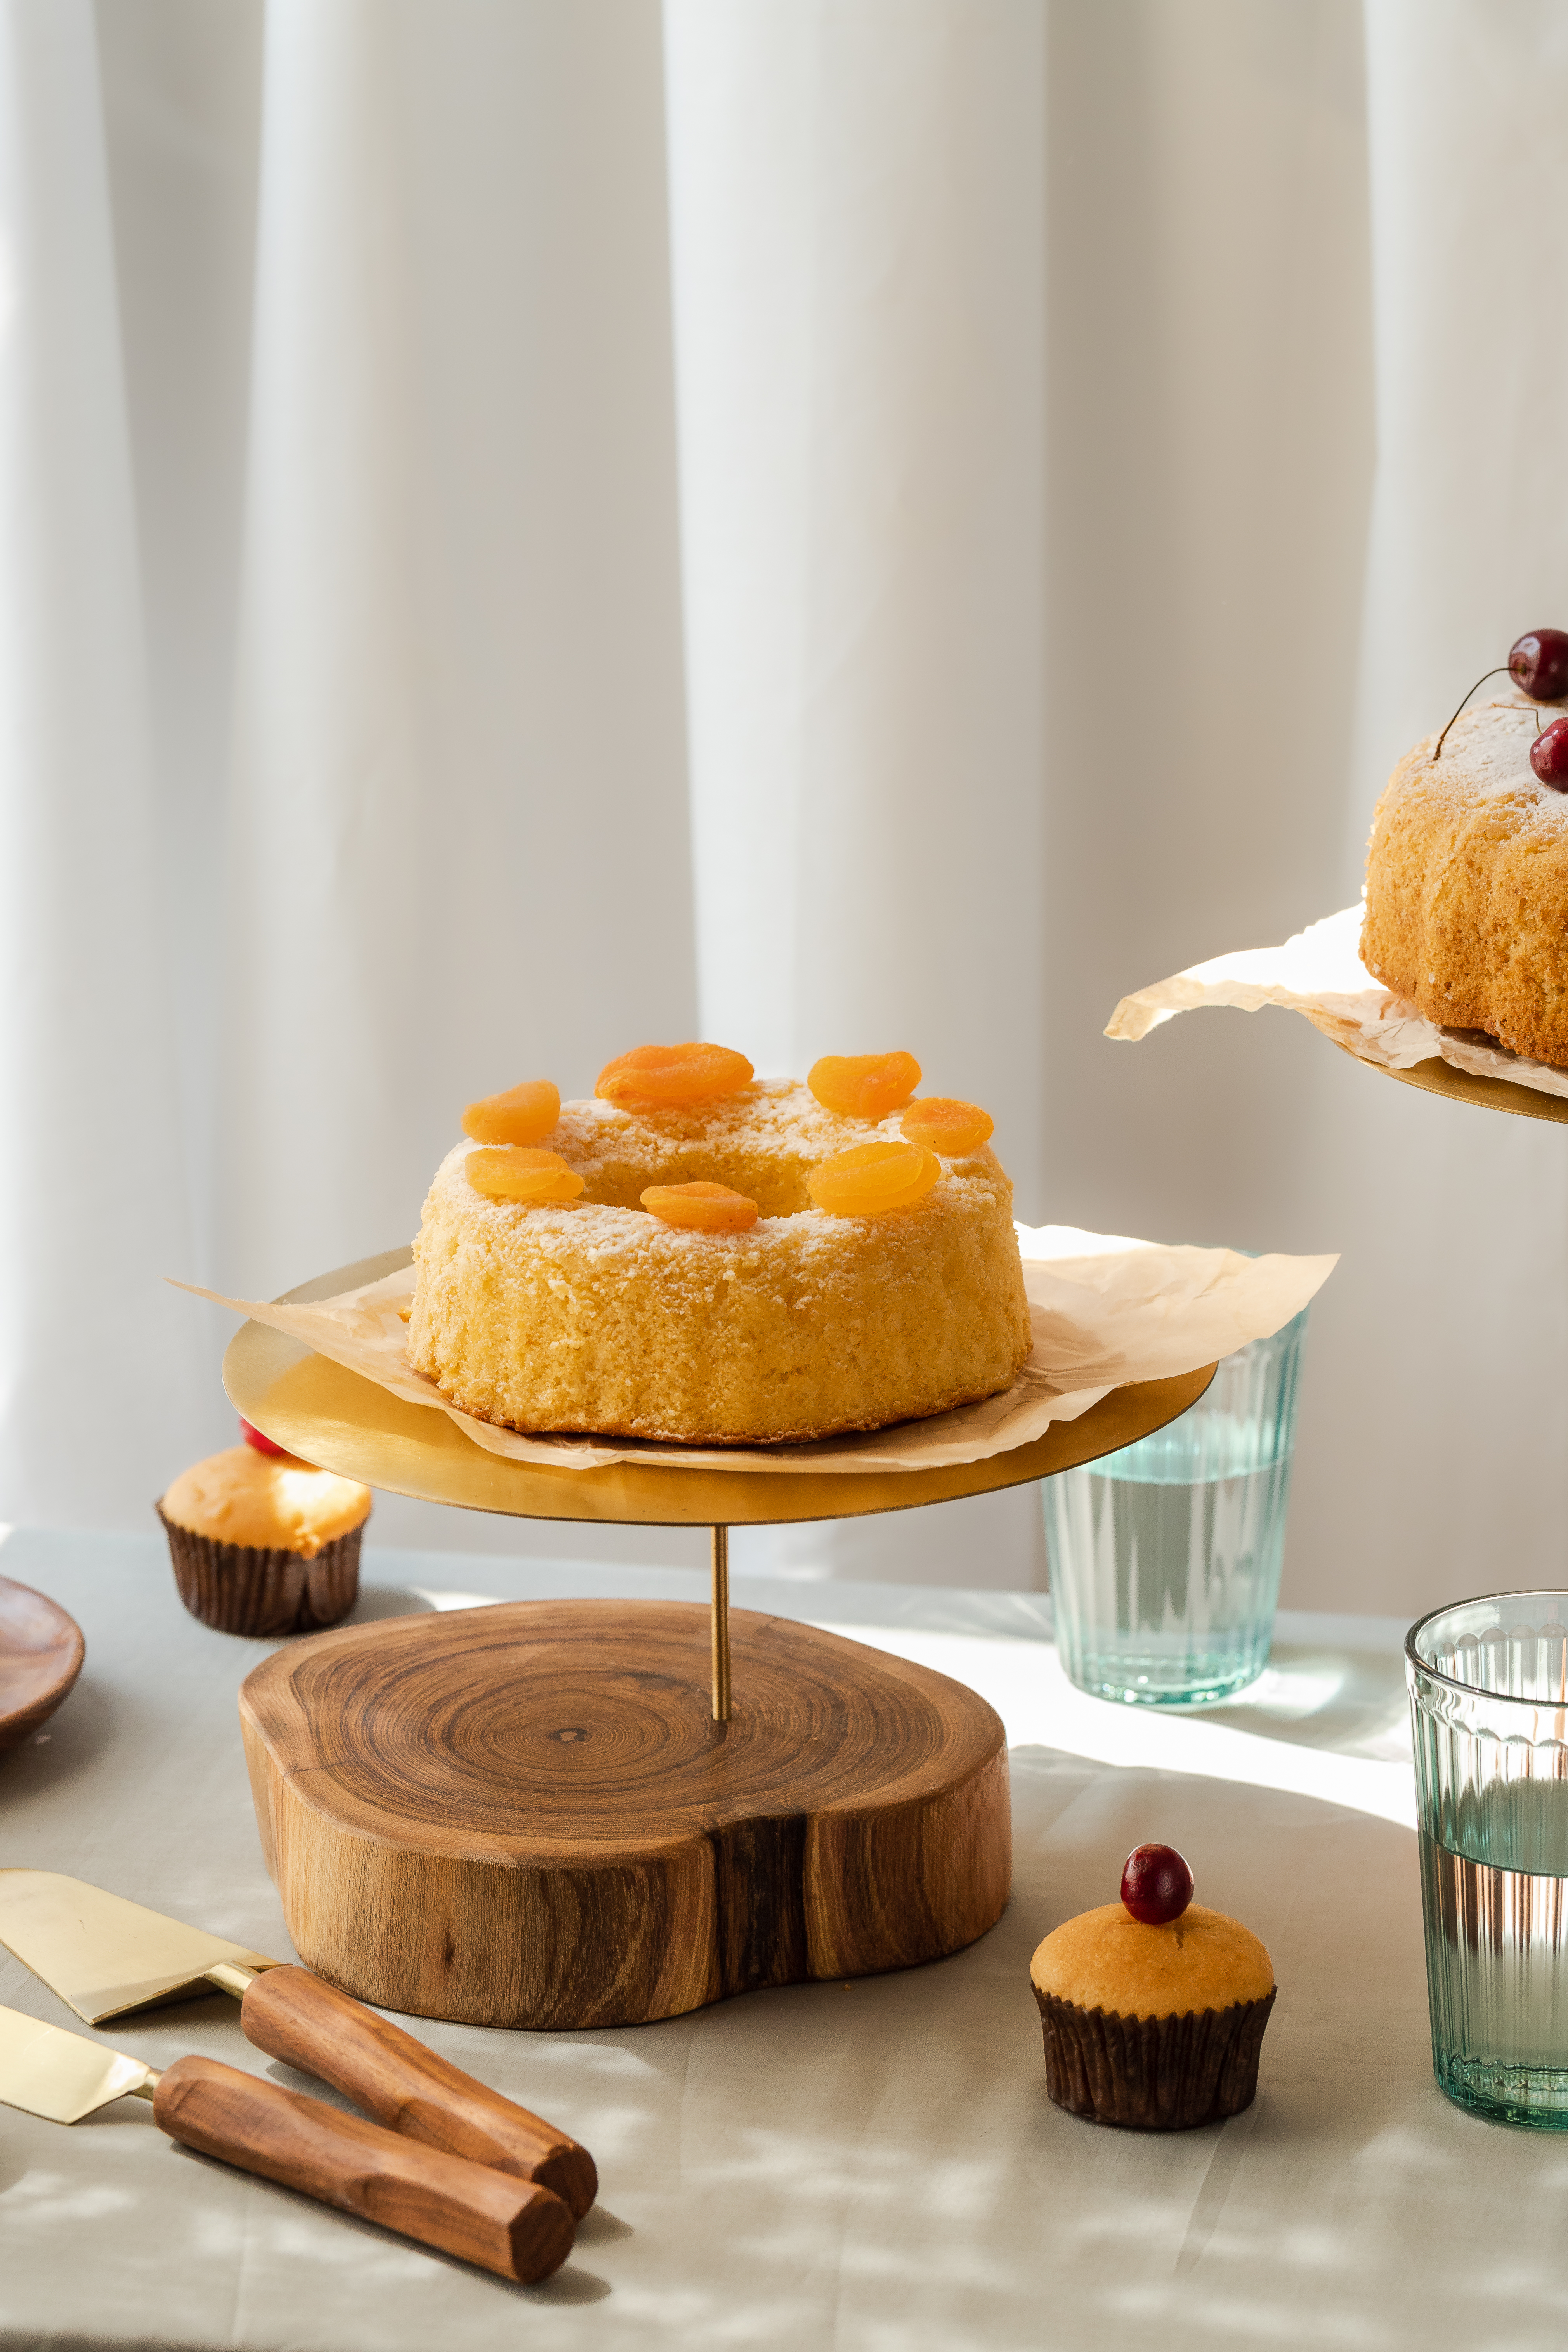 UNEVEN BASE CAKE STAND